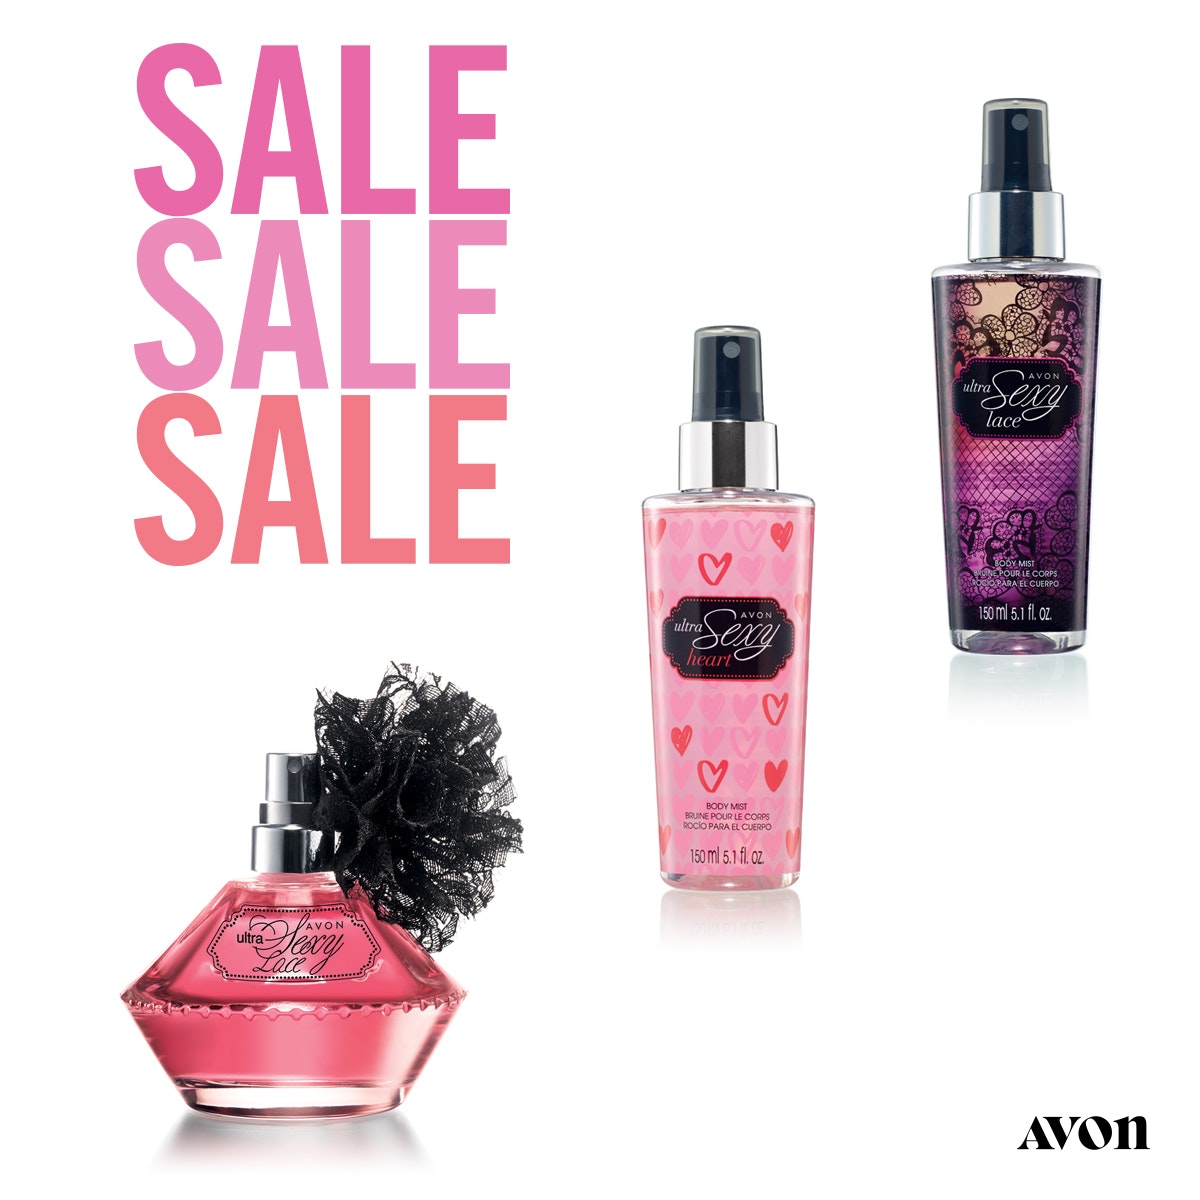 Sexy Lace Perfume by Avon, now on Sale!